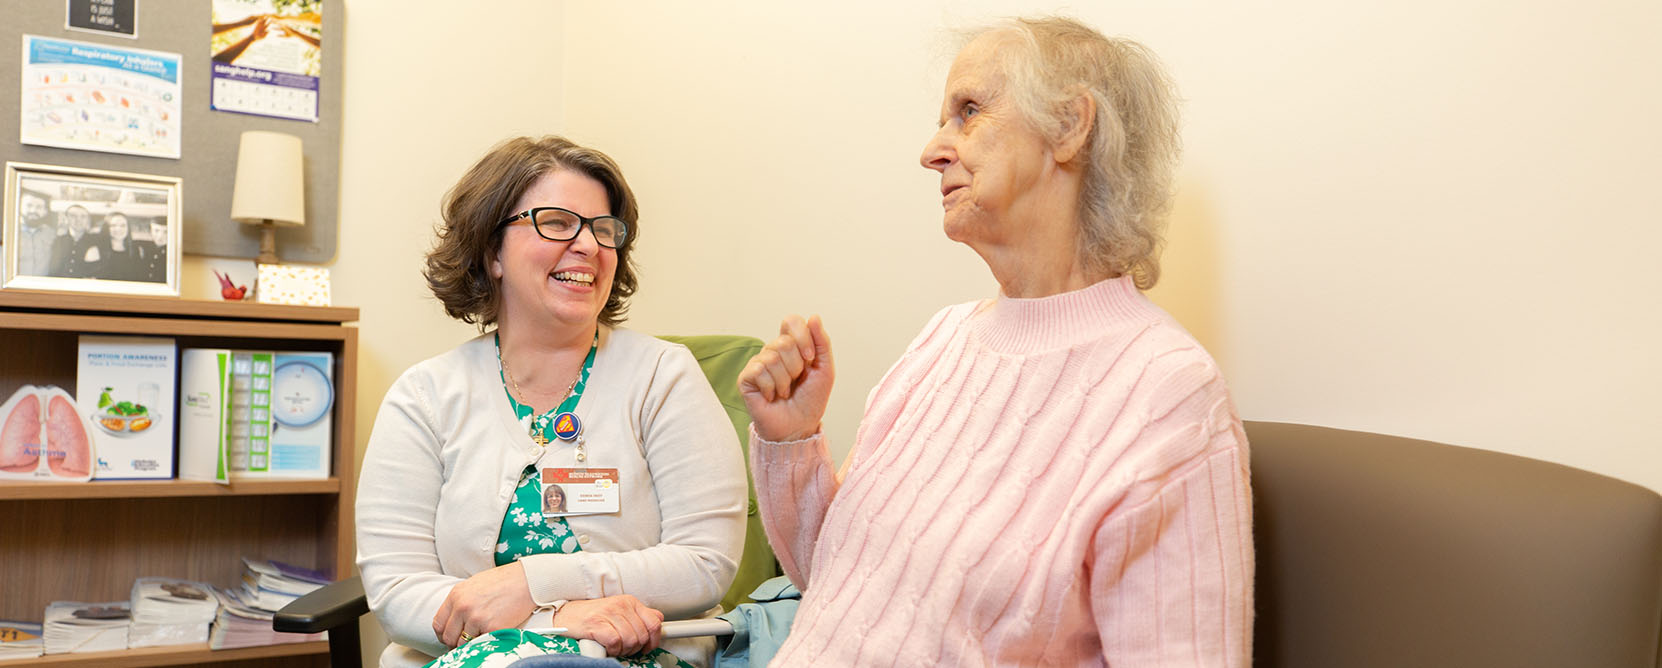 Older adult patient speaks with care manager